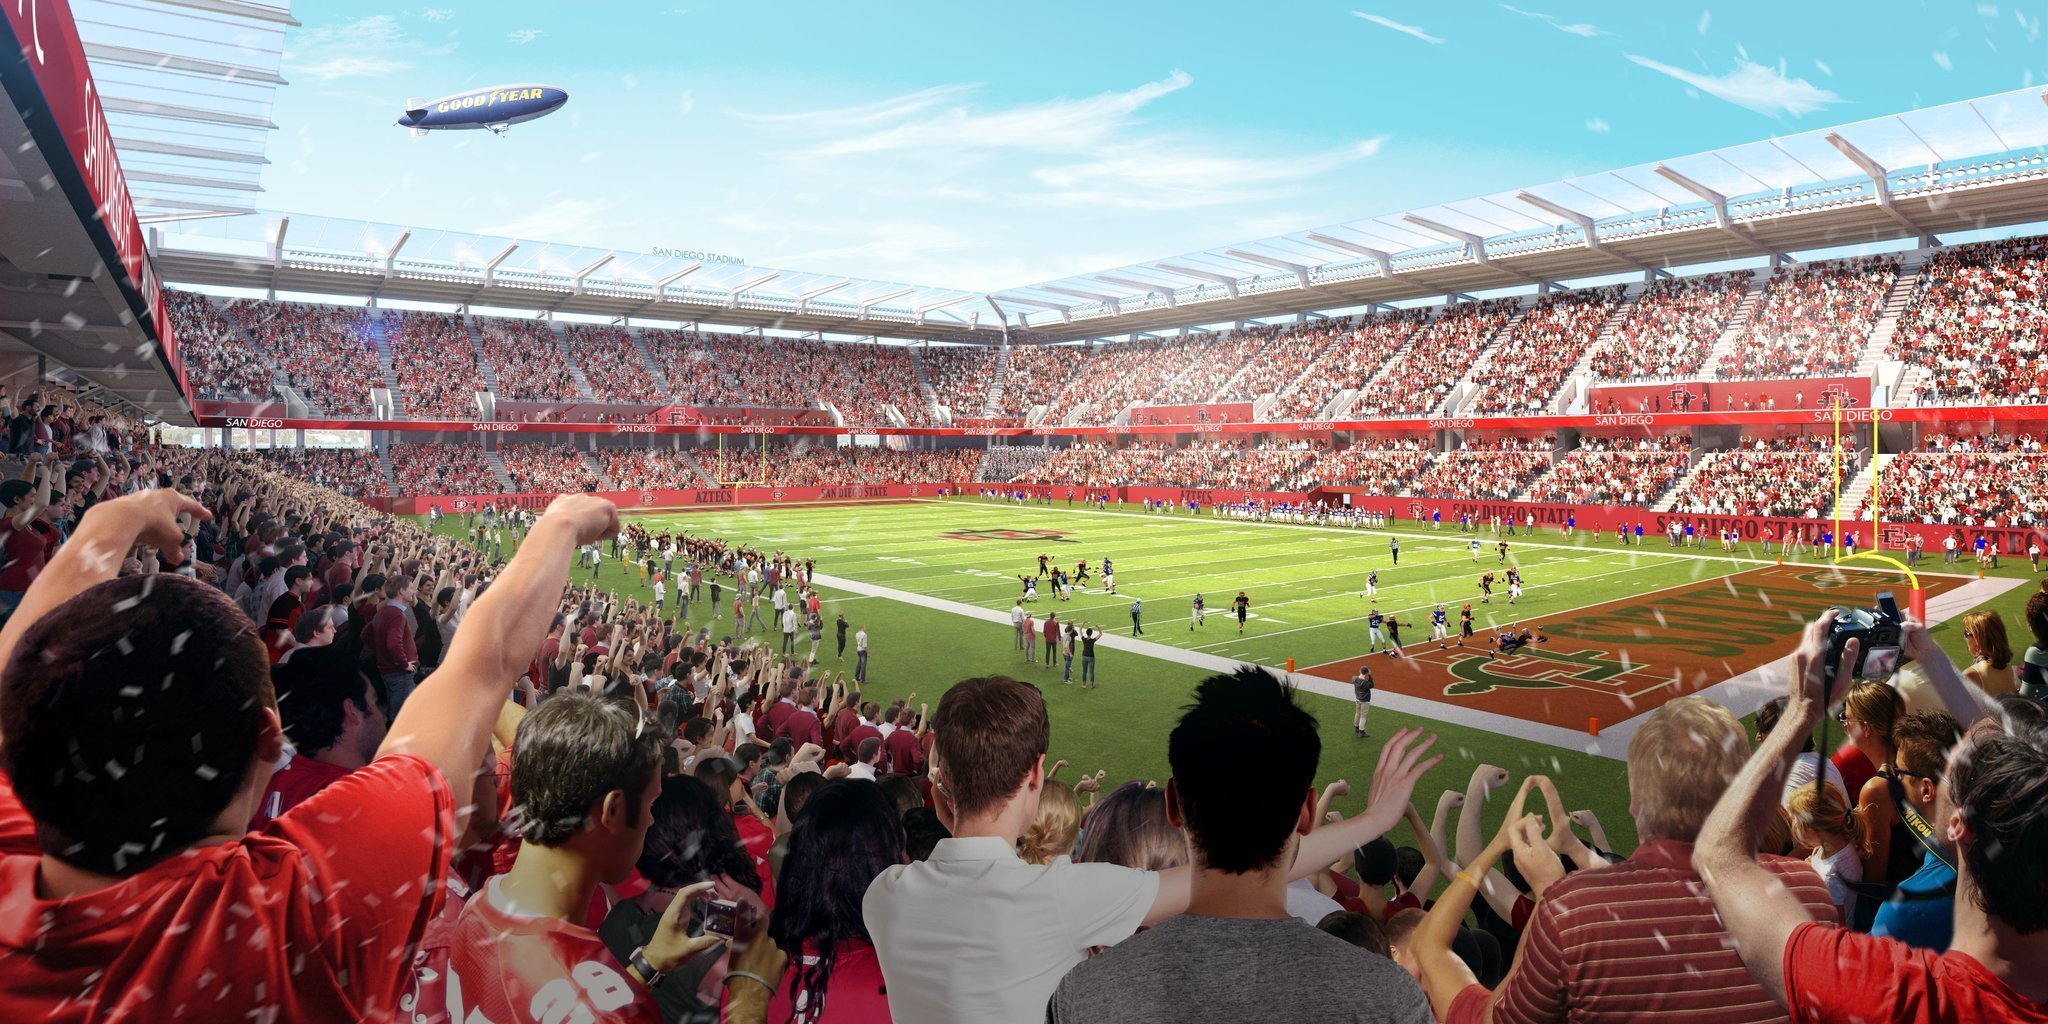 SoccerCity stadium would fit most past SDSU football crowds - The San